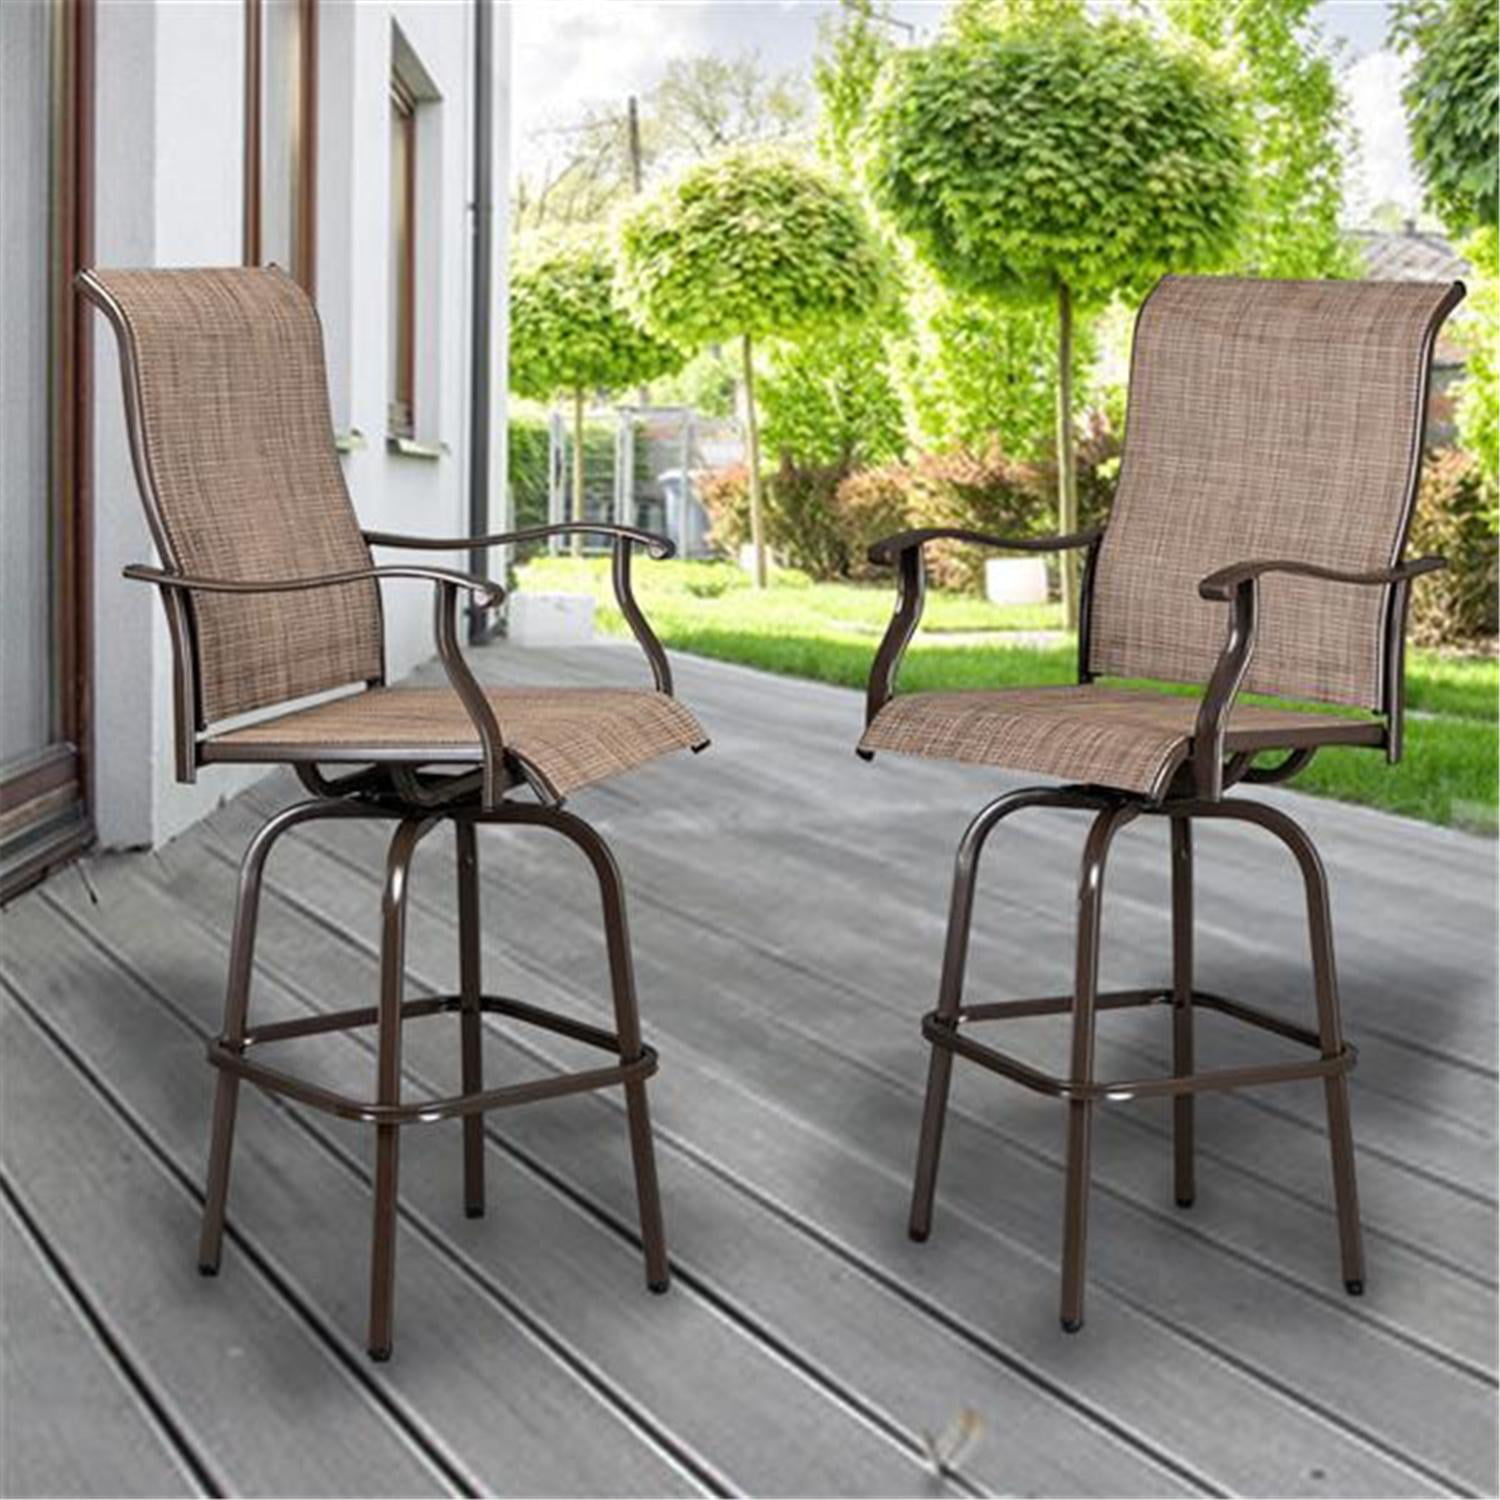 Set of 2 Vicllax Outdoor Swivel Bar Stools-Patio Bar Height Furniture Chairs 